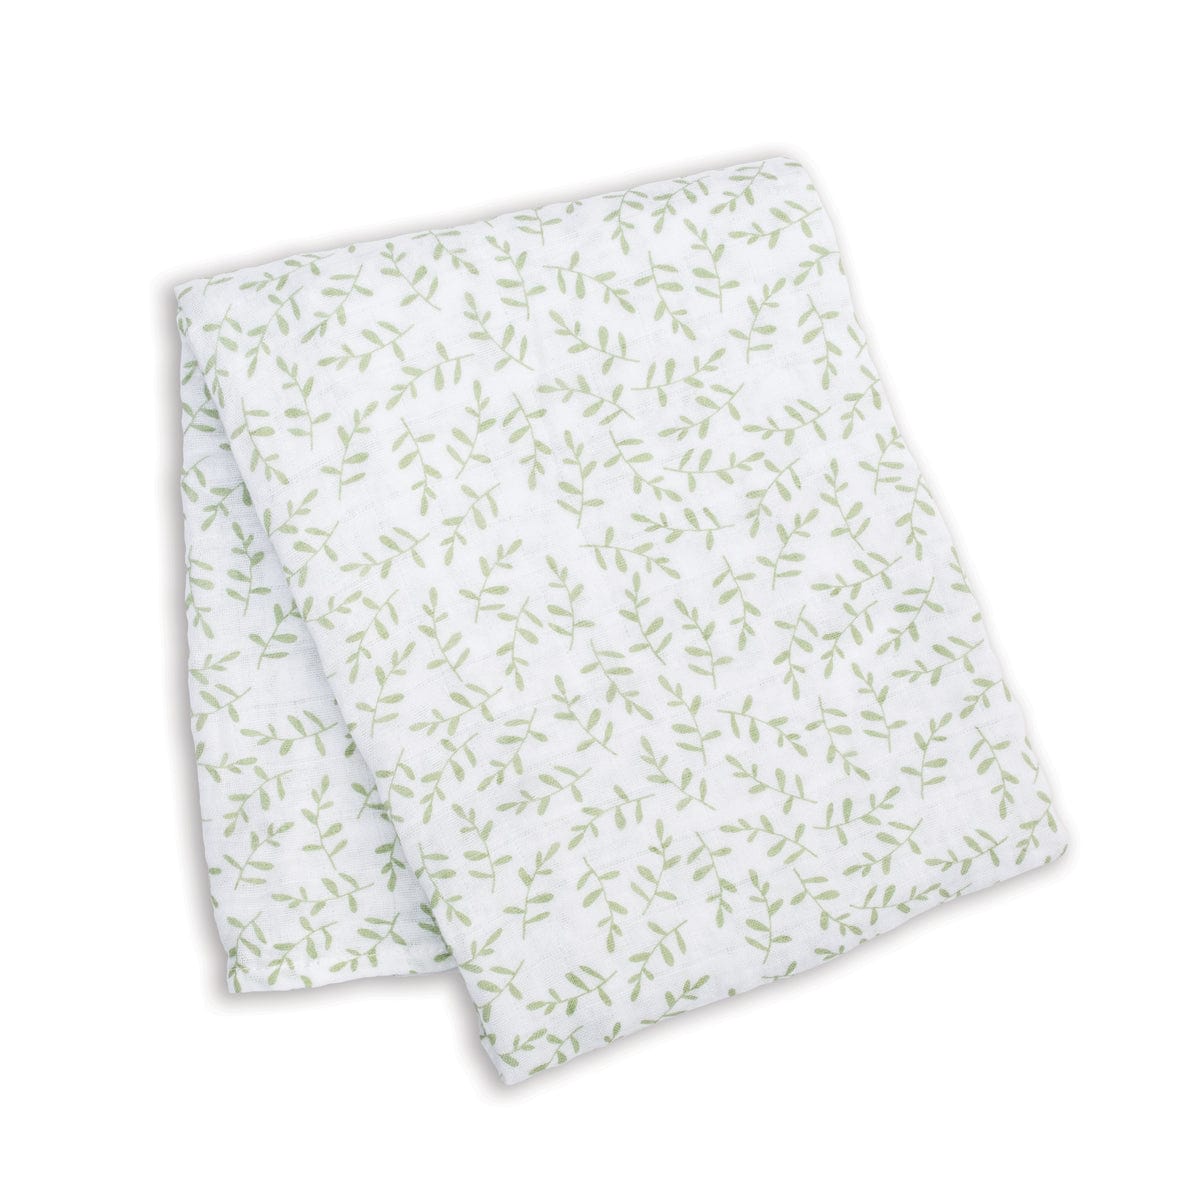 Large Muslin Baby Swaddle, Greenary product